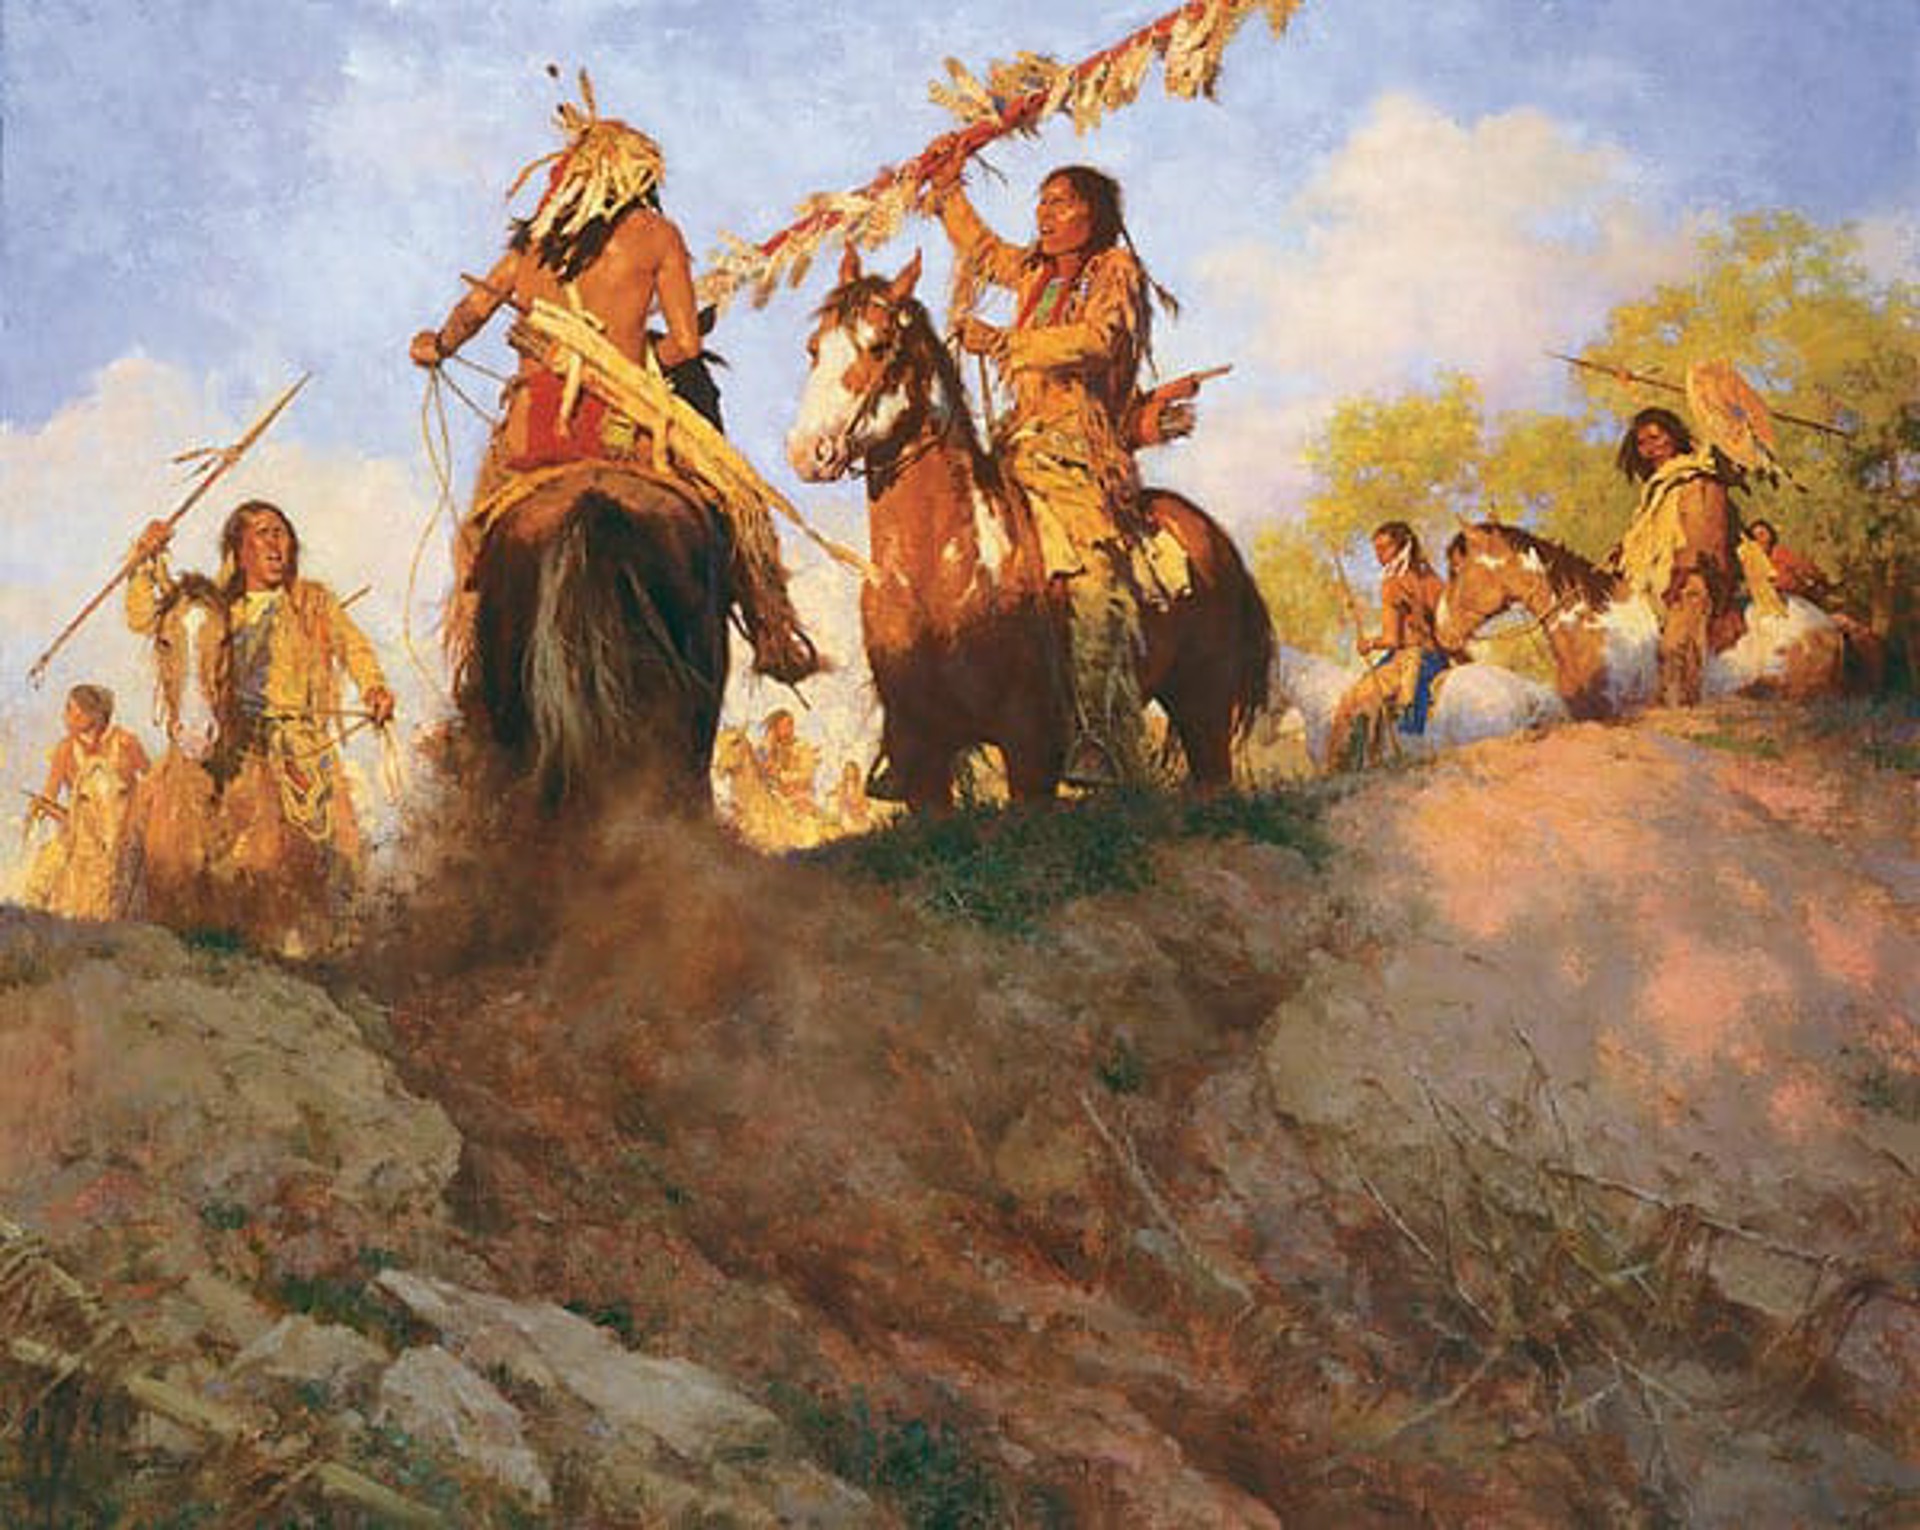 Sunset for the Comanche  by Howard Terpning